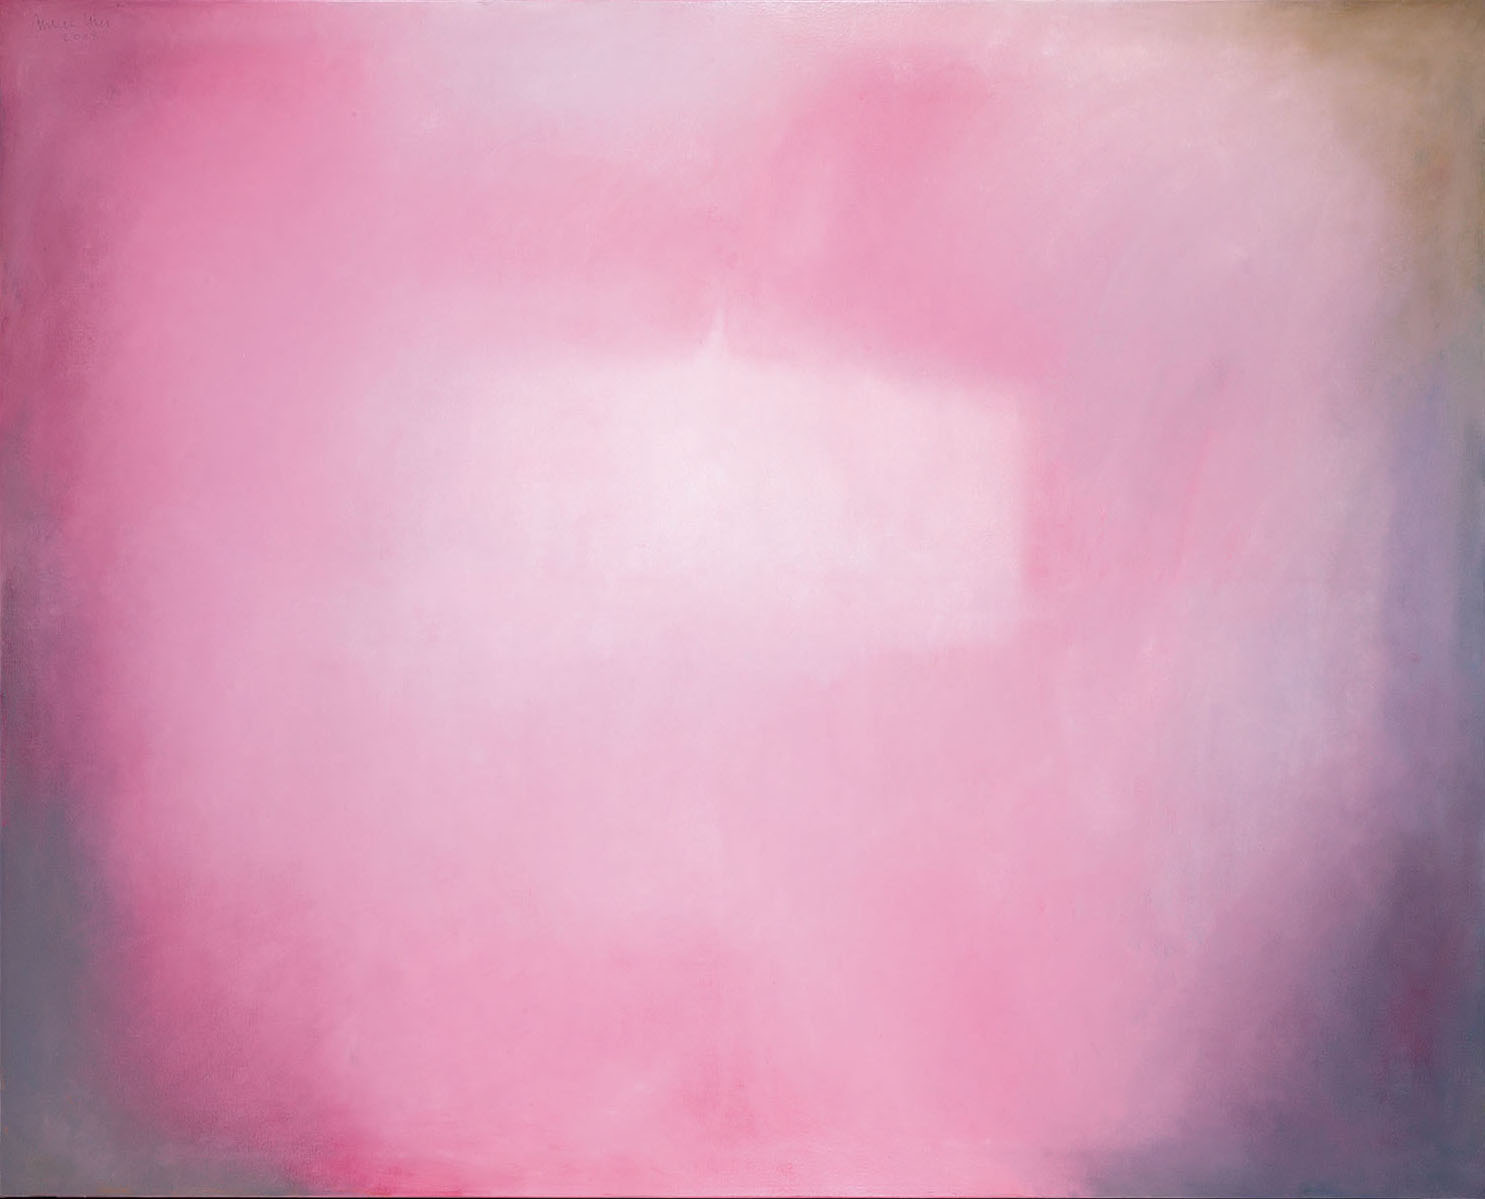 Atmosphere, 2008, oil on canvas, cm 130 x 162